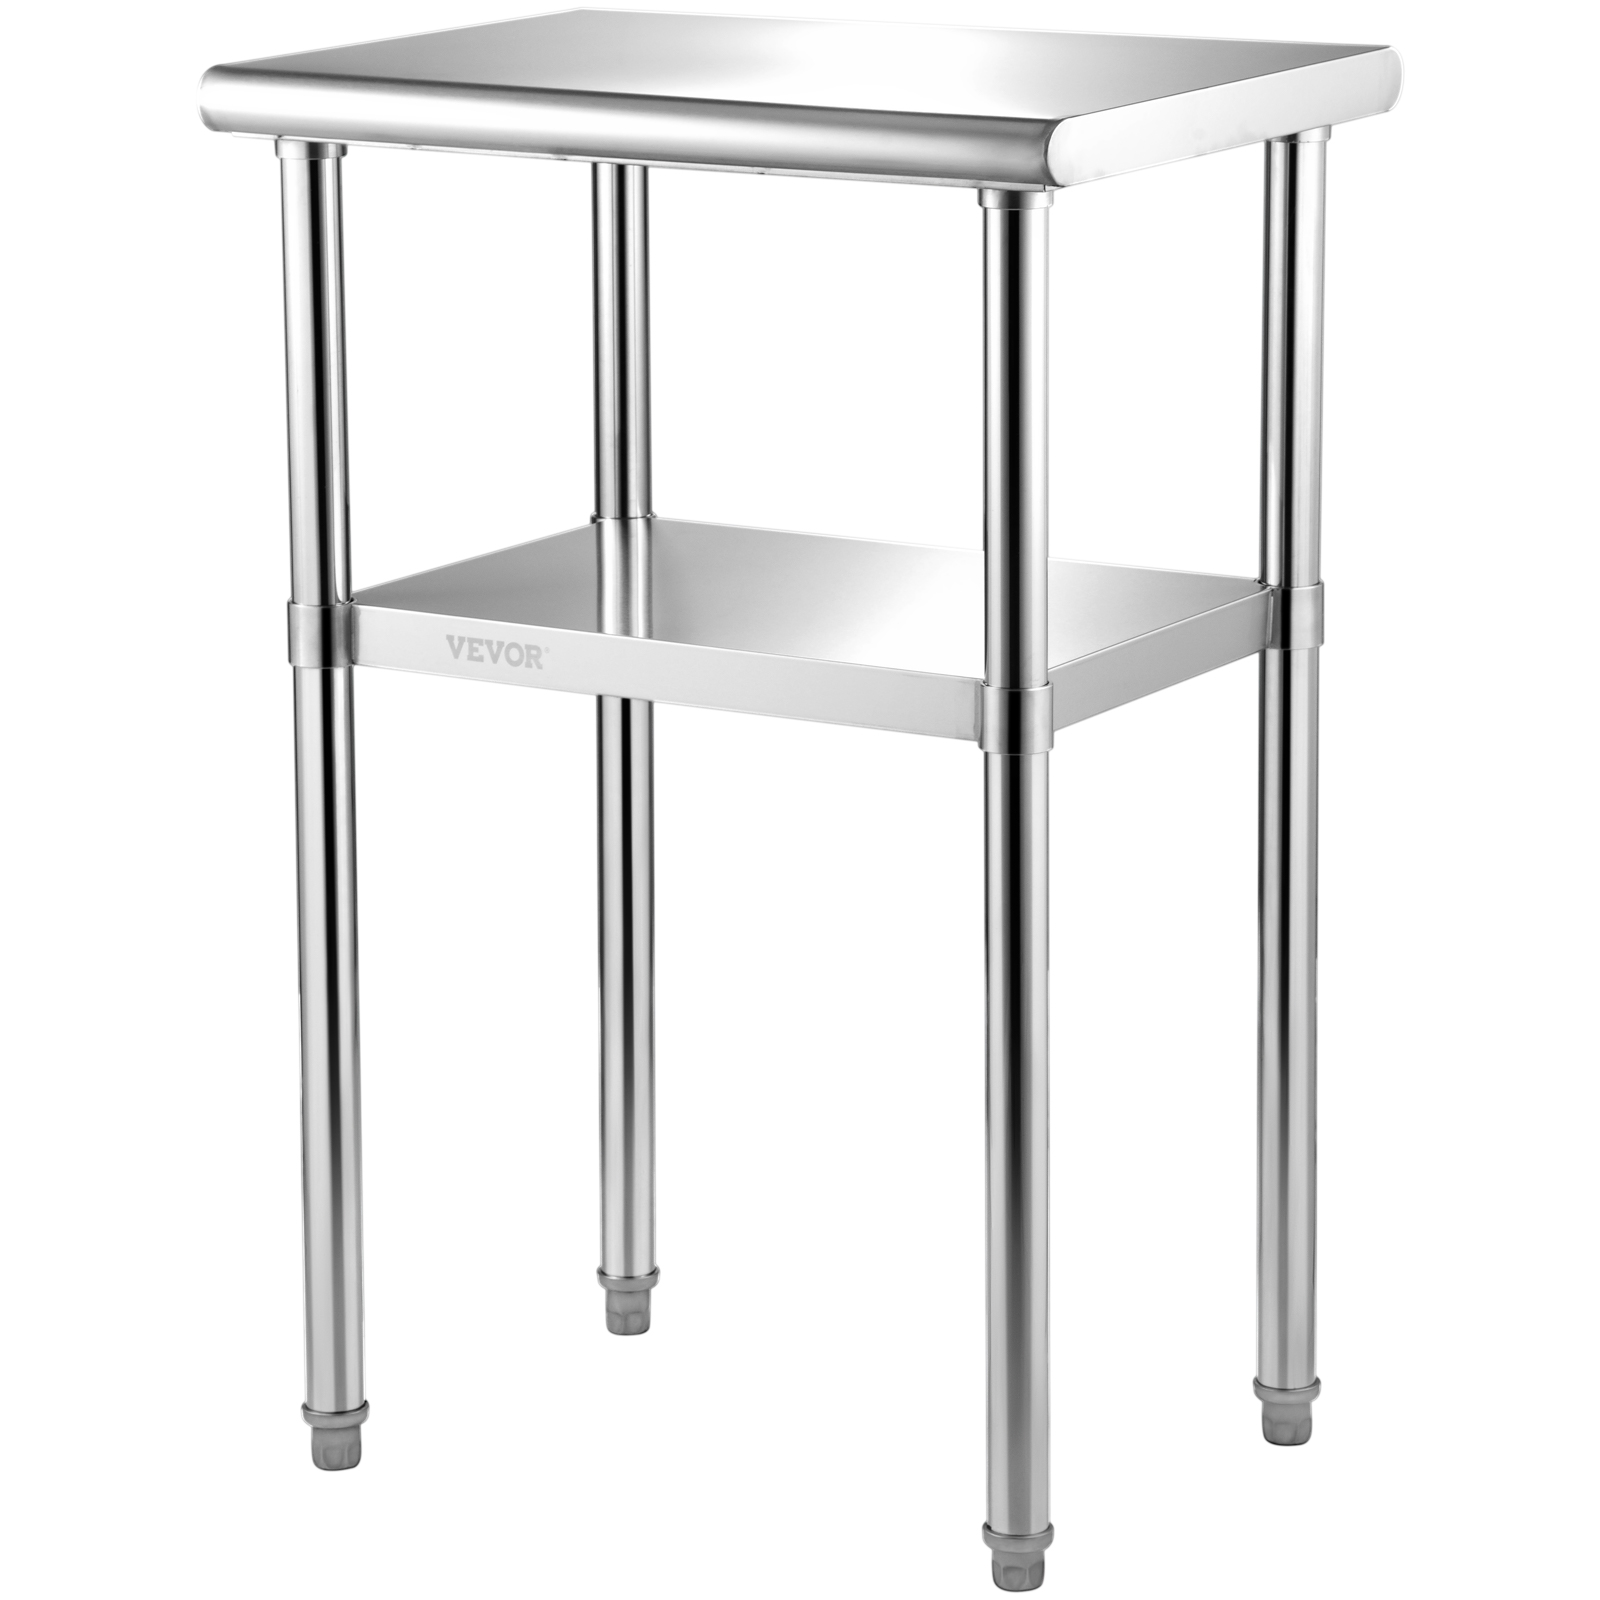 VEVOR Stainless Steel Prep Table, 24 x 18 x 36 Inch, 600lbs Load